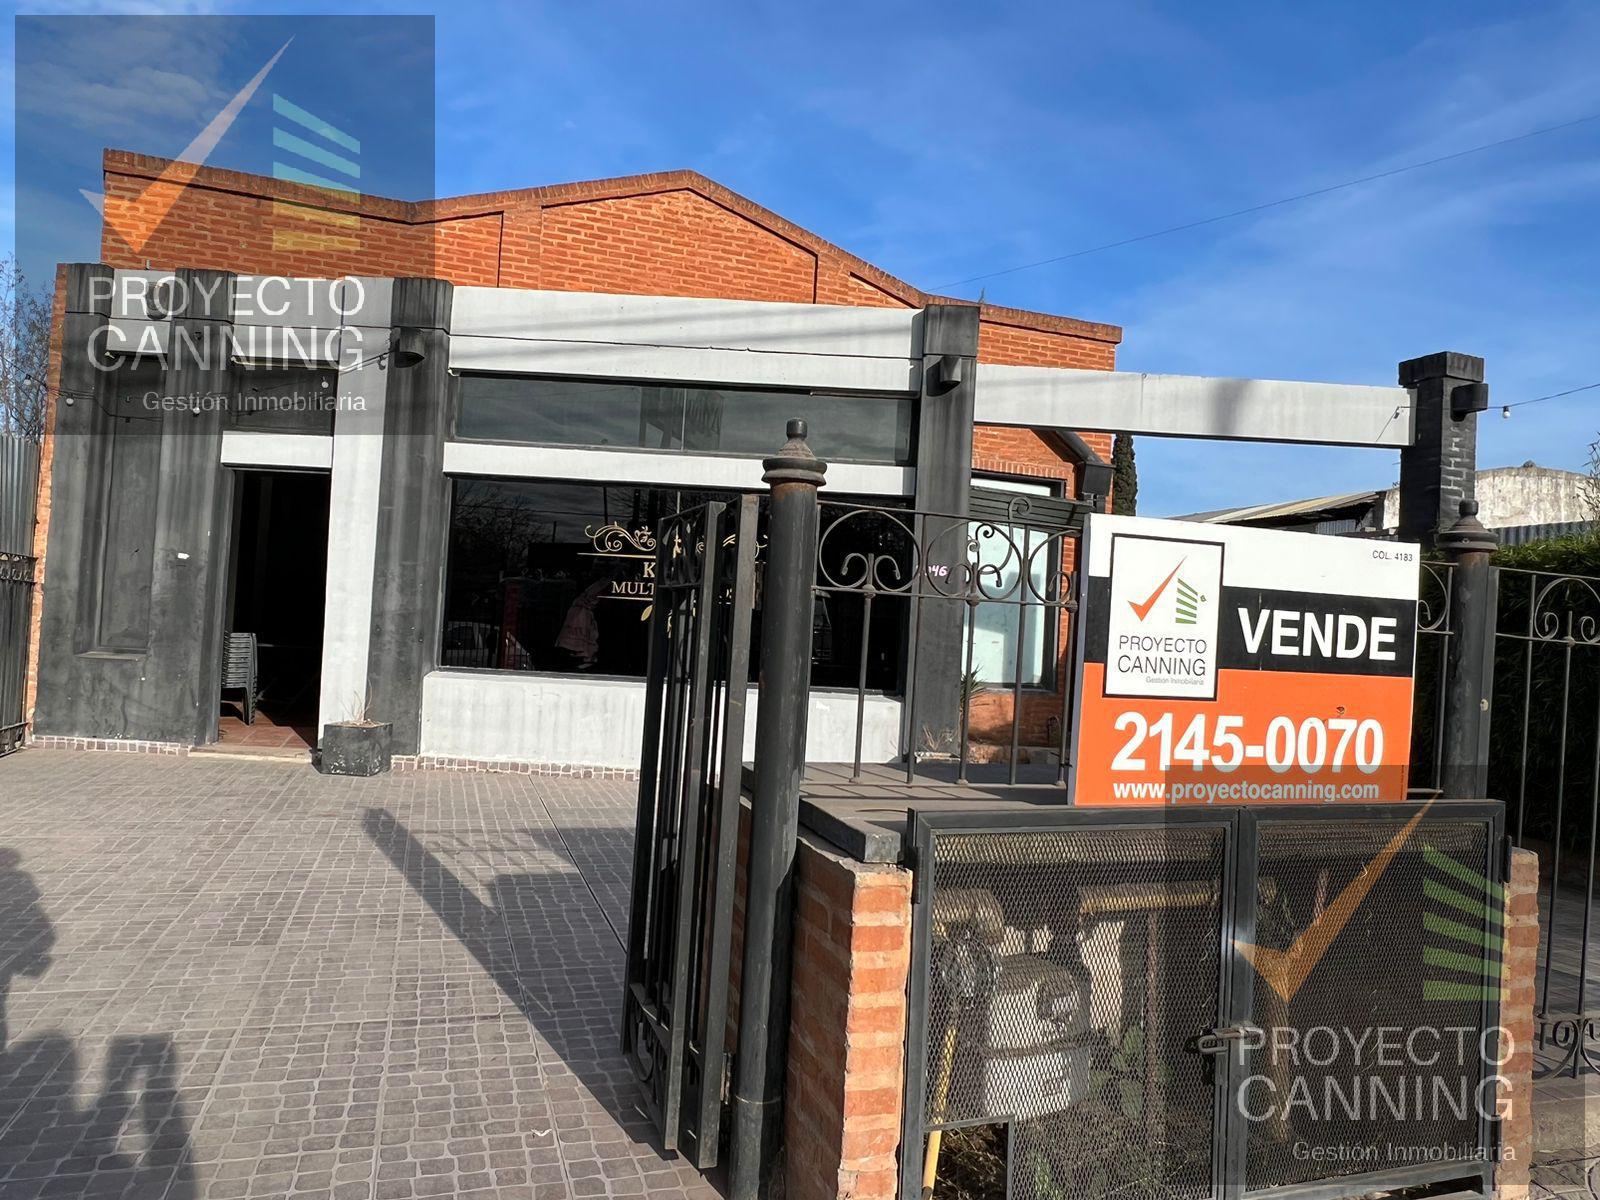 #4295520 | Venta | Local | Canning (Proyecto Canning)